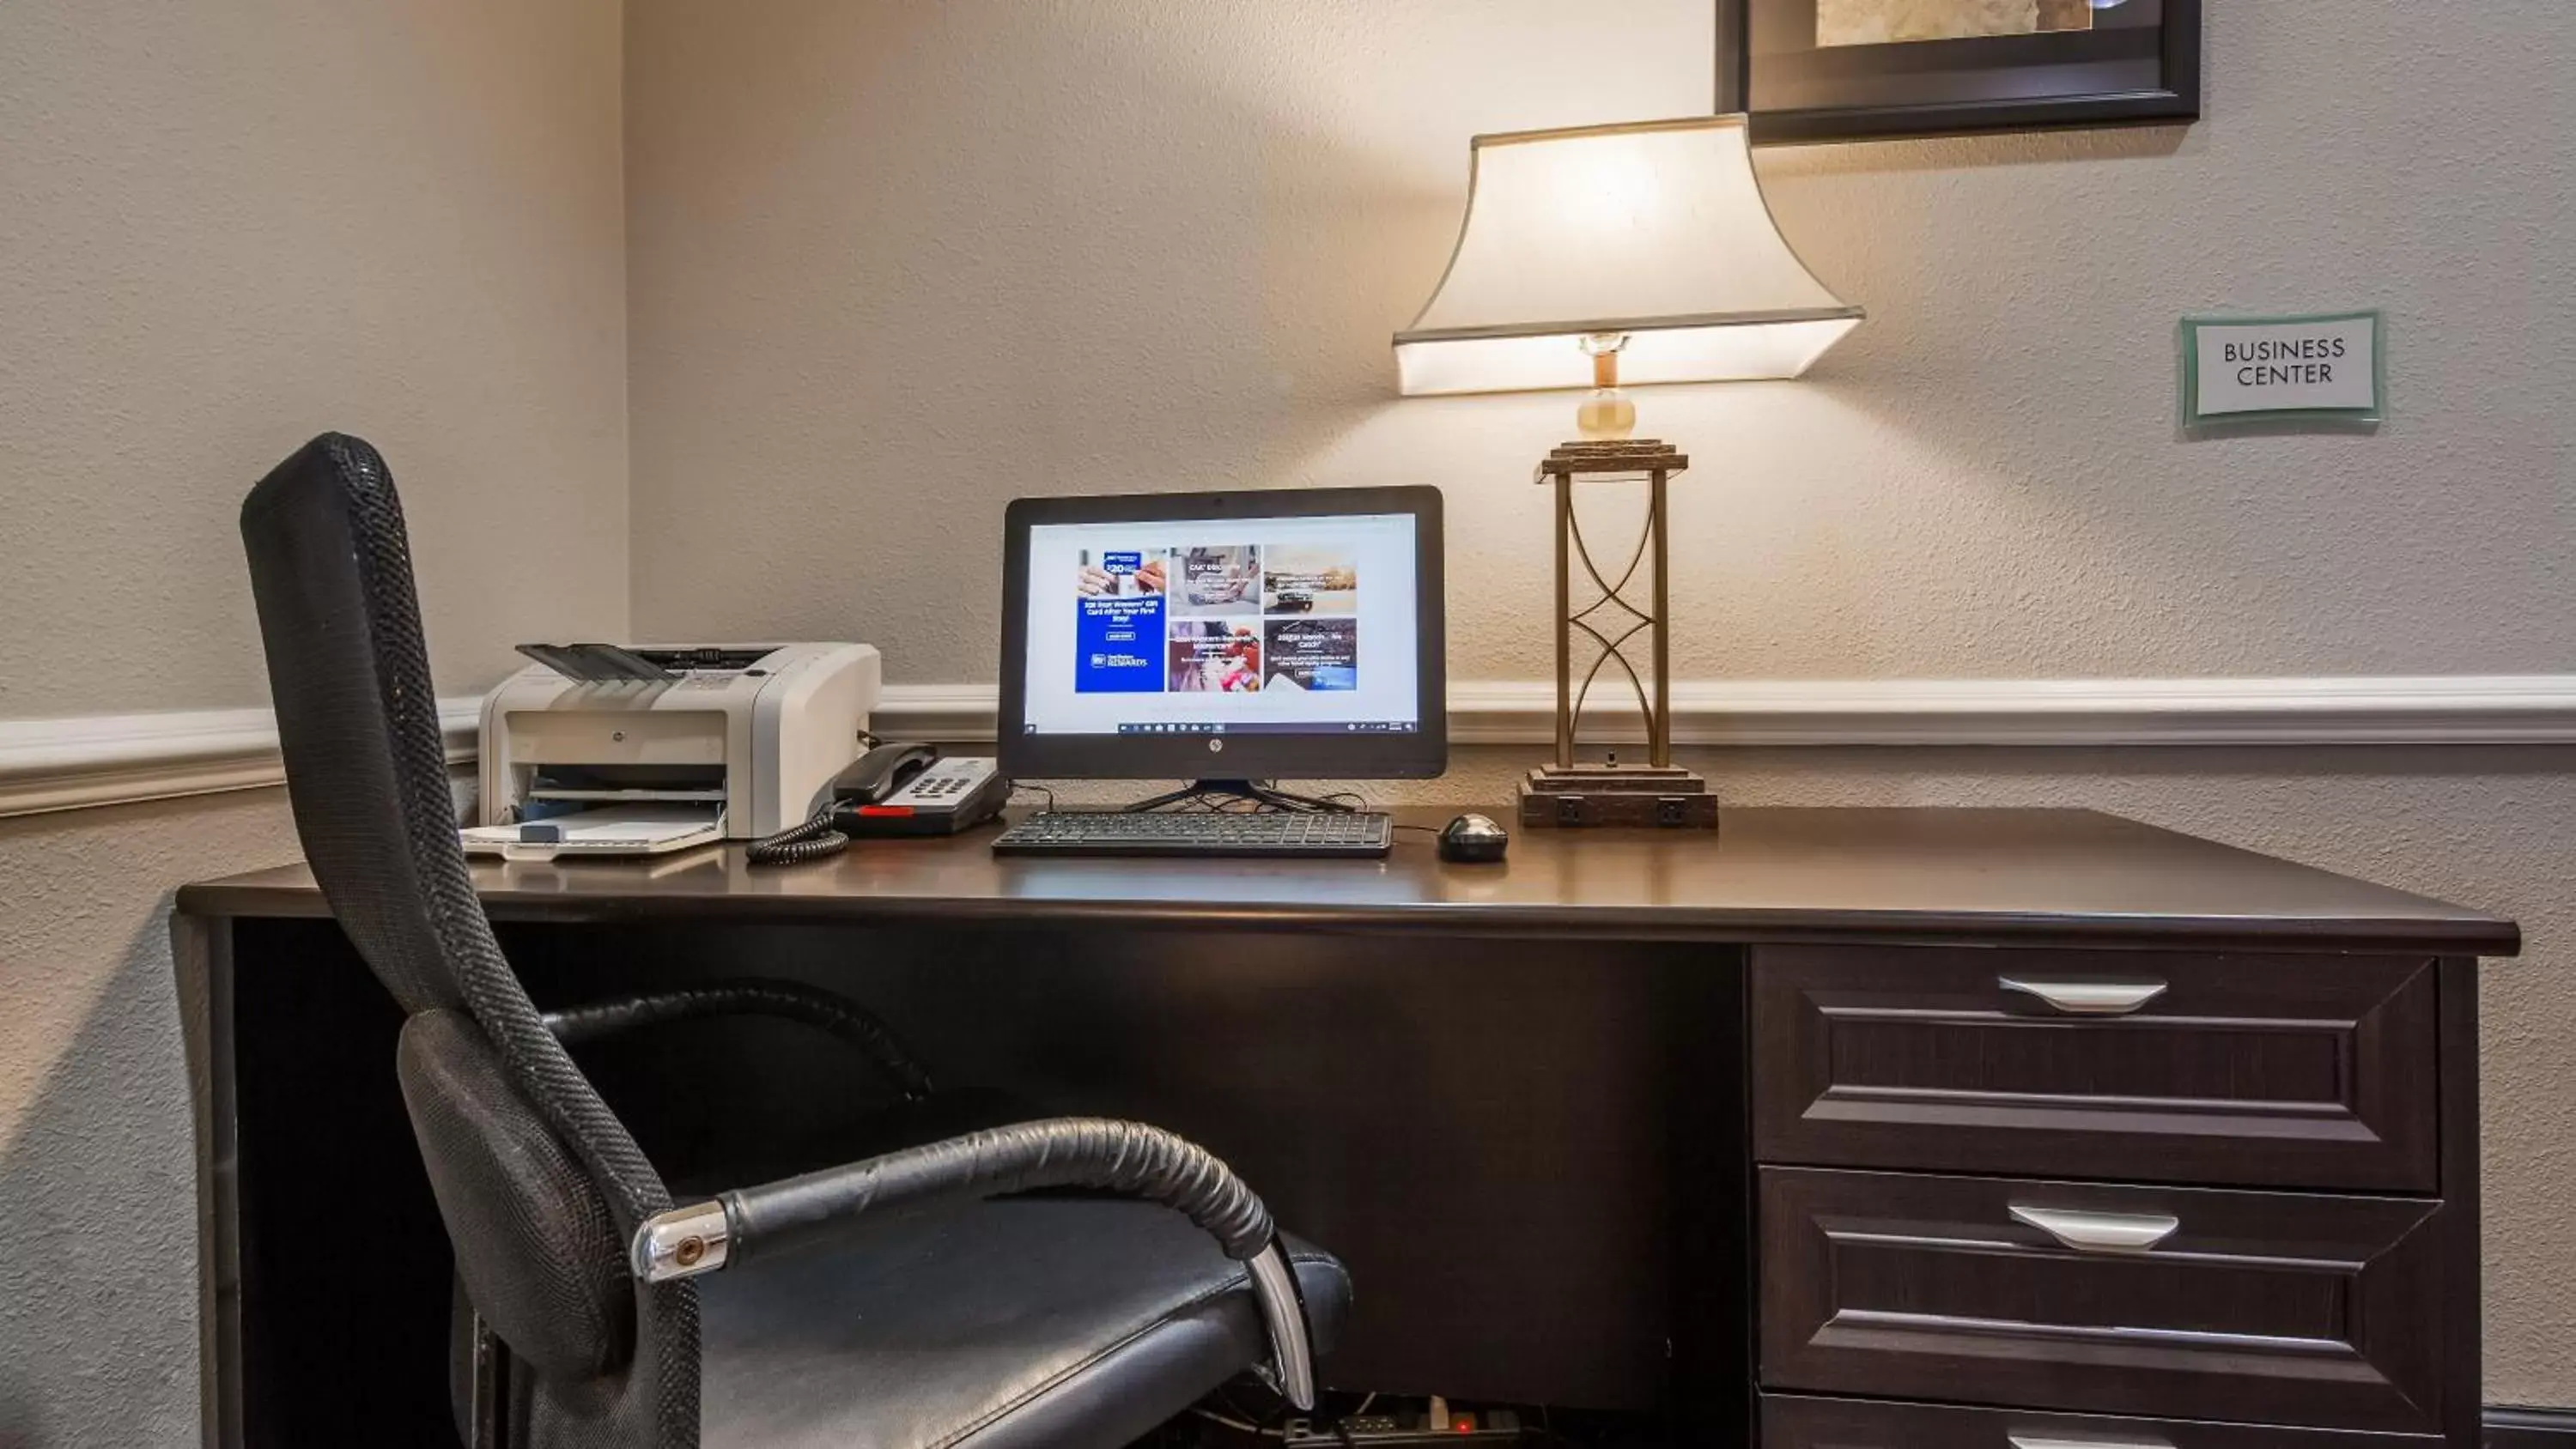 Business facilities in Best Western Mayport Inn and Suites